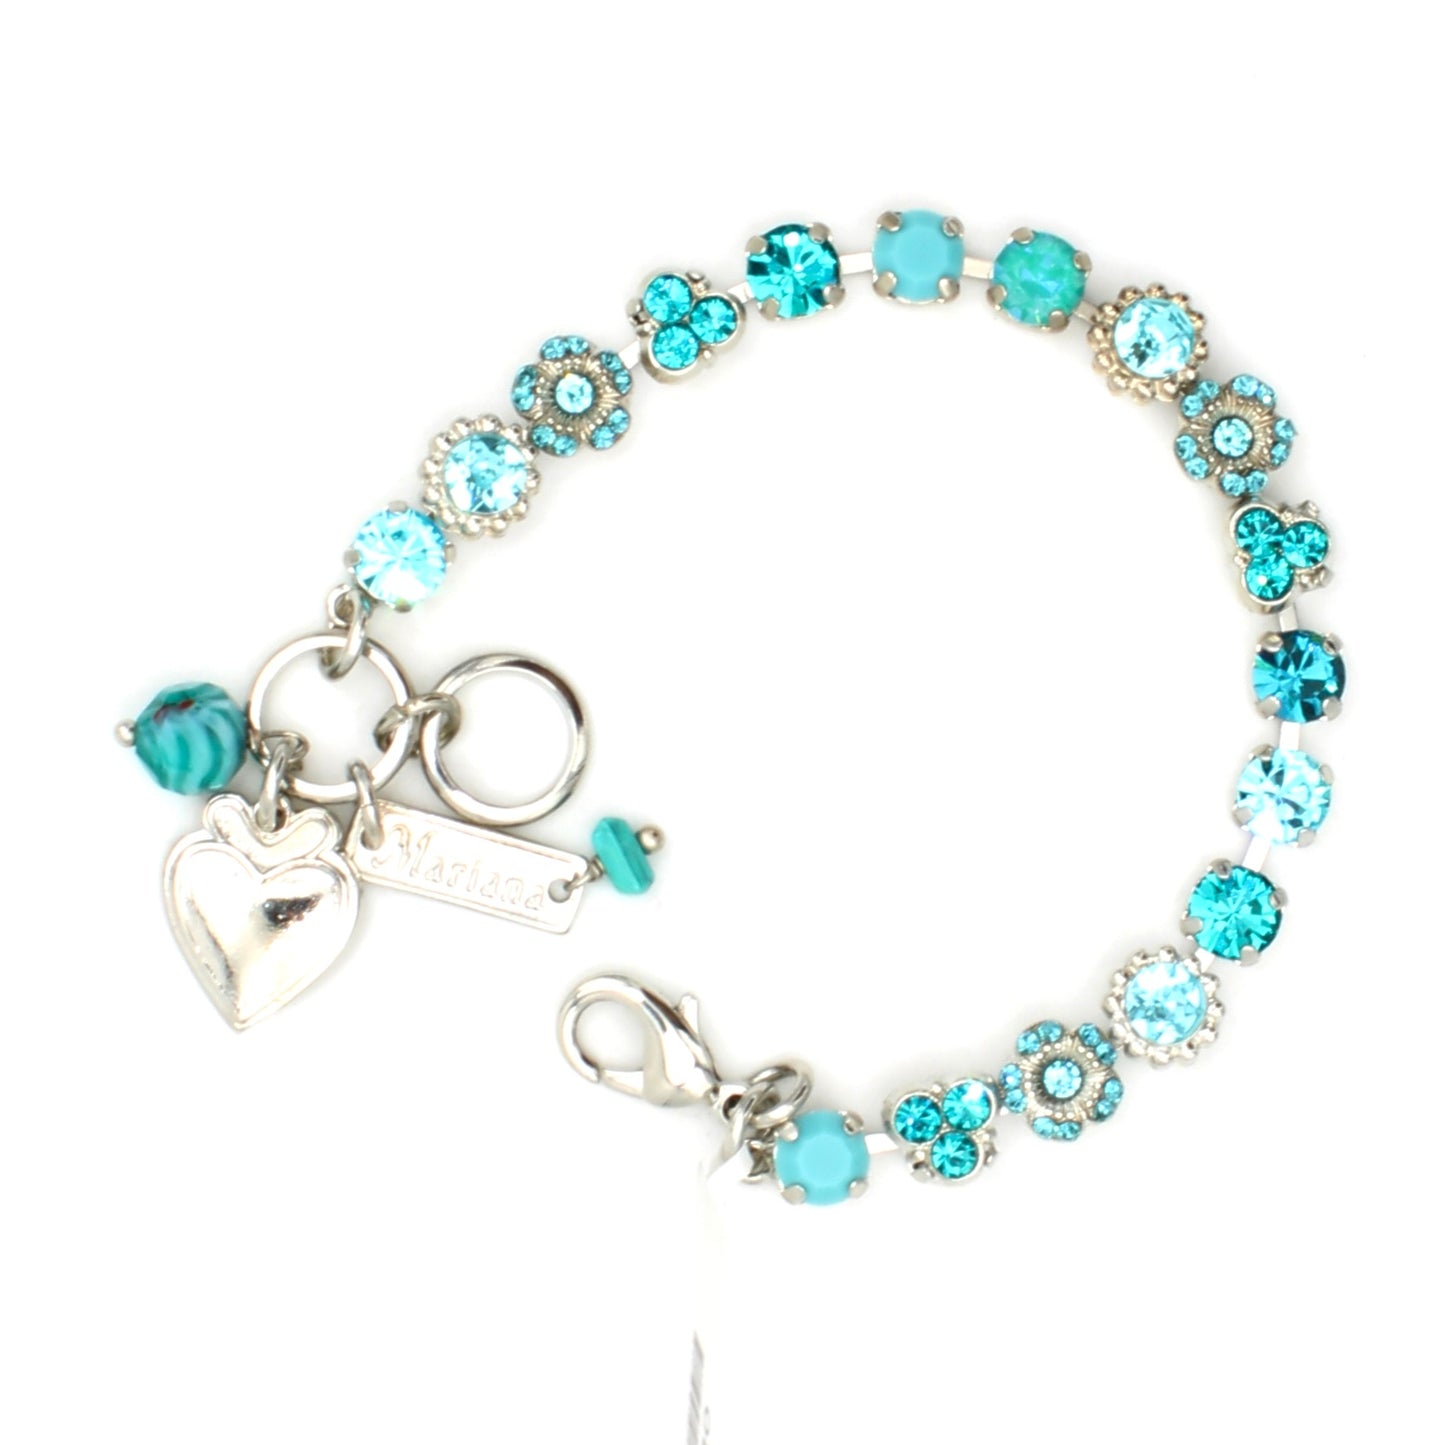 Addicted to Love Collection Petite Blossom Bracelet - MaryTyke's